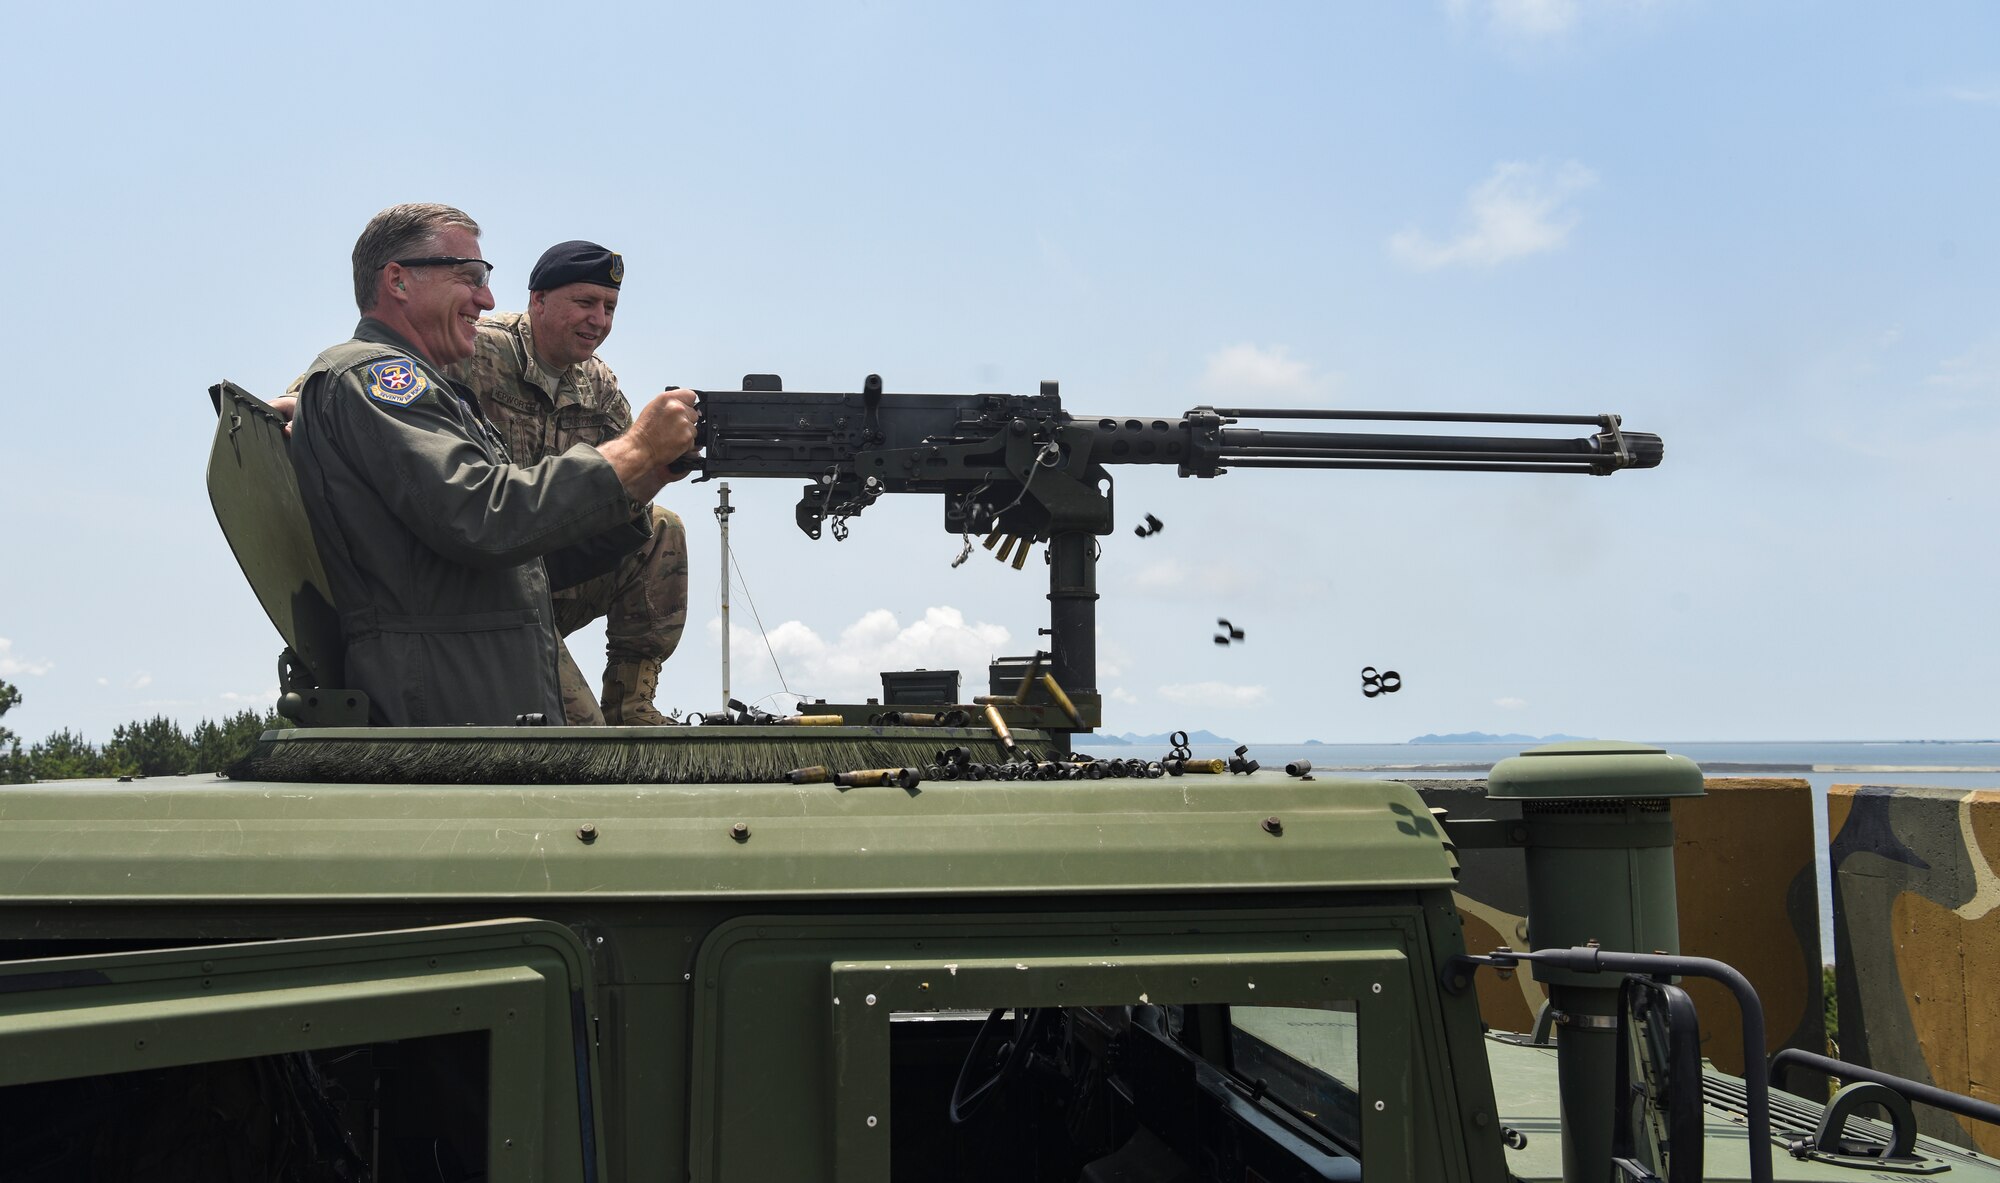 U.S. Air Force Brig. Gen. David Eaglin, 7th Air Force vice commander, fires an M2 heavy machine gun during an immersion tour at Kunsan Air Base, Republic of Korea, July 12, 2019. Eaglin had the opportunity to sample some of the weaponry the 8th SFS uses to defend the base. (U.S. Air Force photo by Staff Sgt. Joshua Edwards)